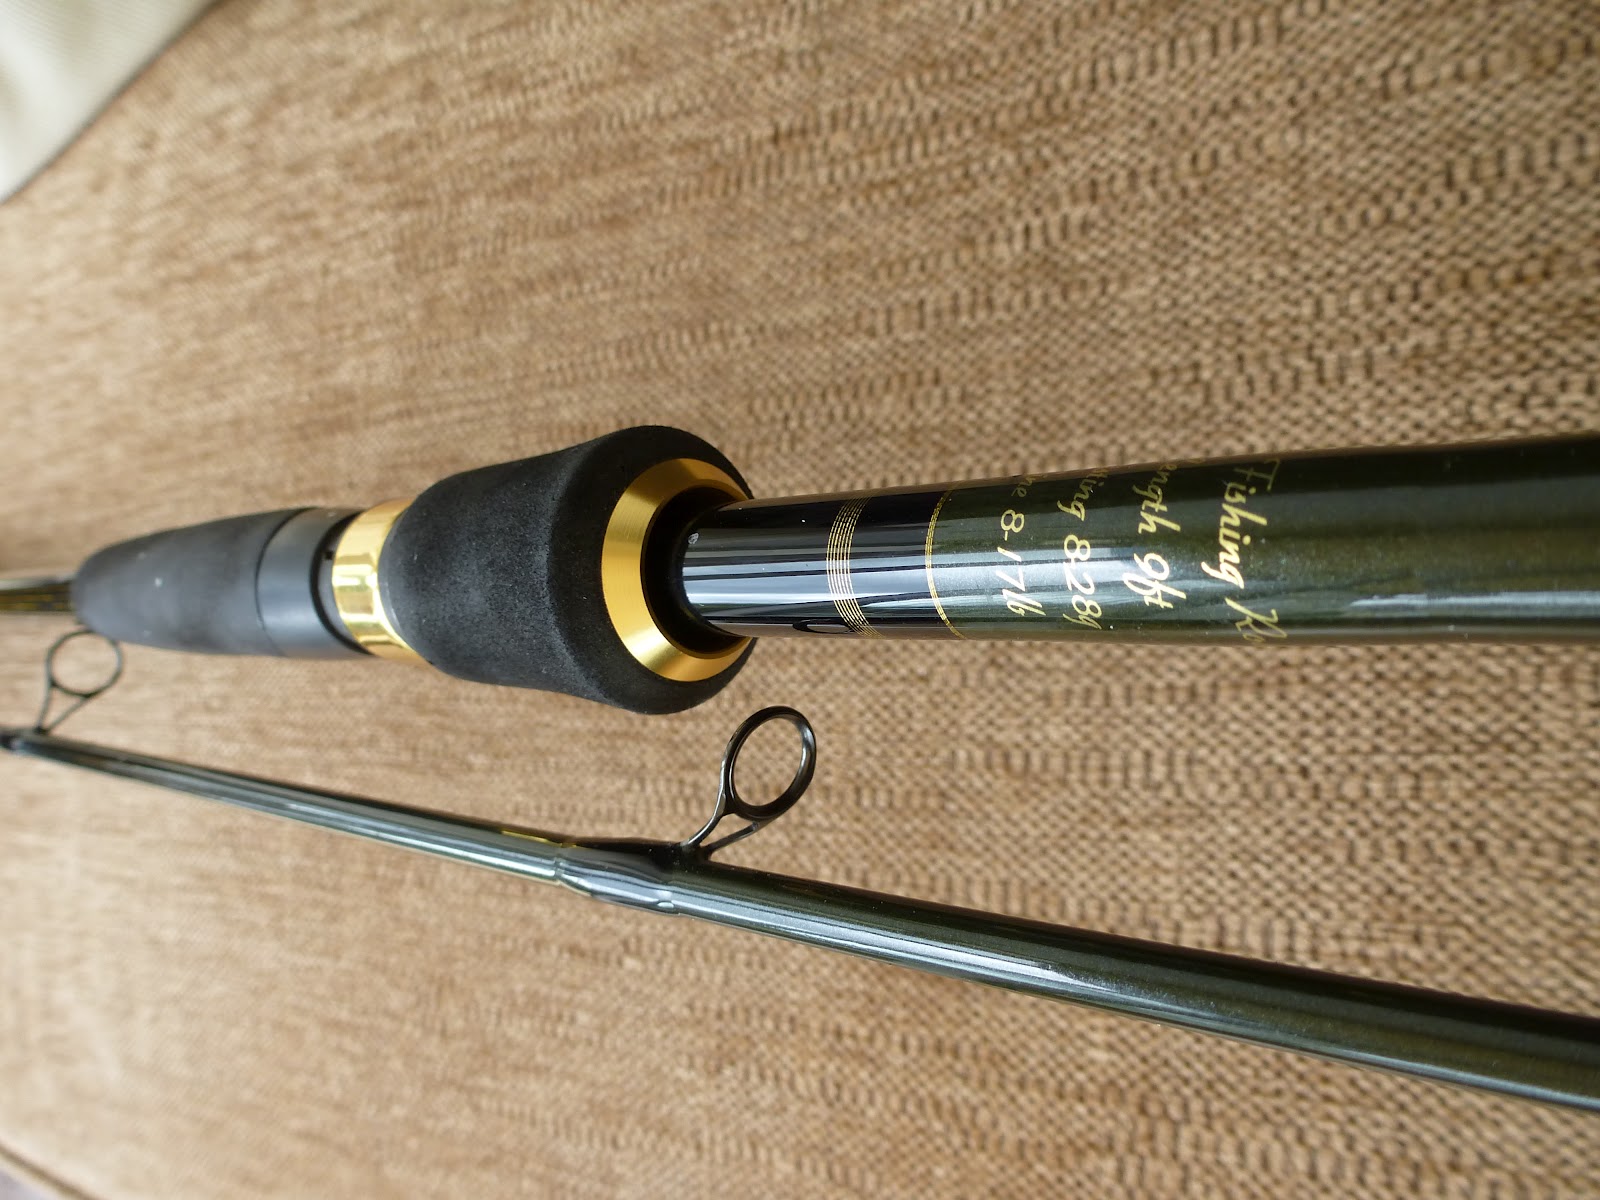 What spinning rod to go with a Shimano Stella 4000?